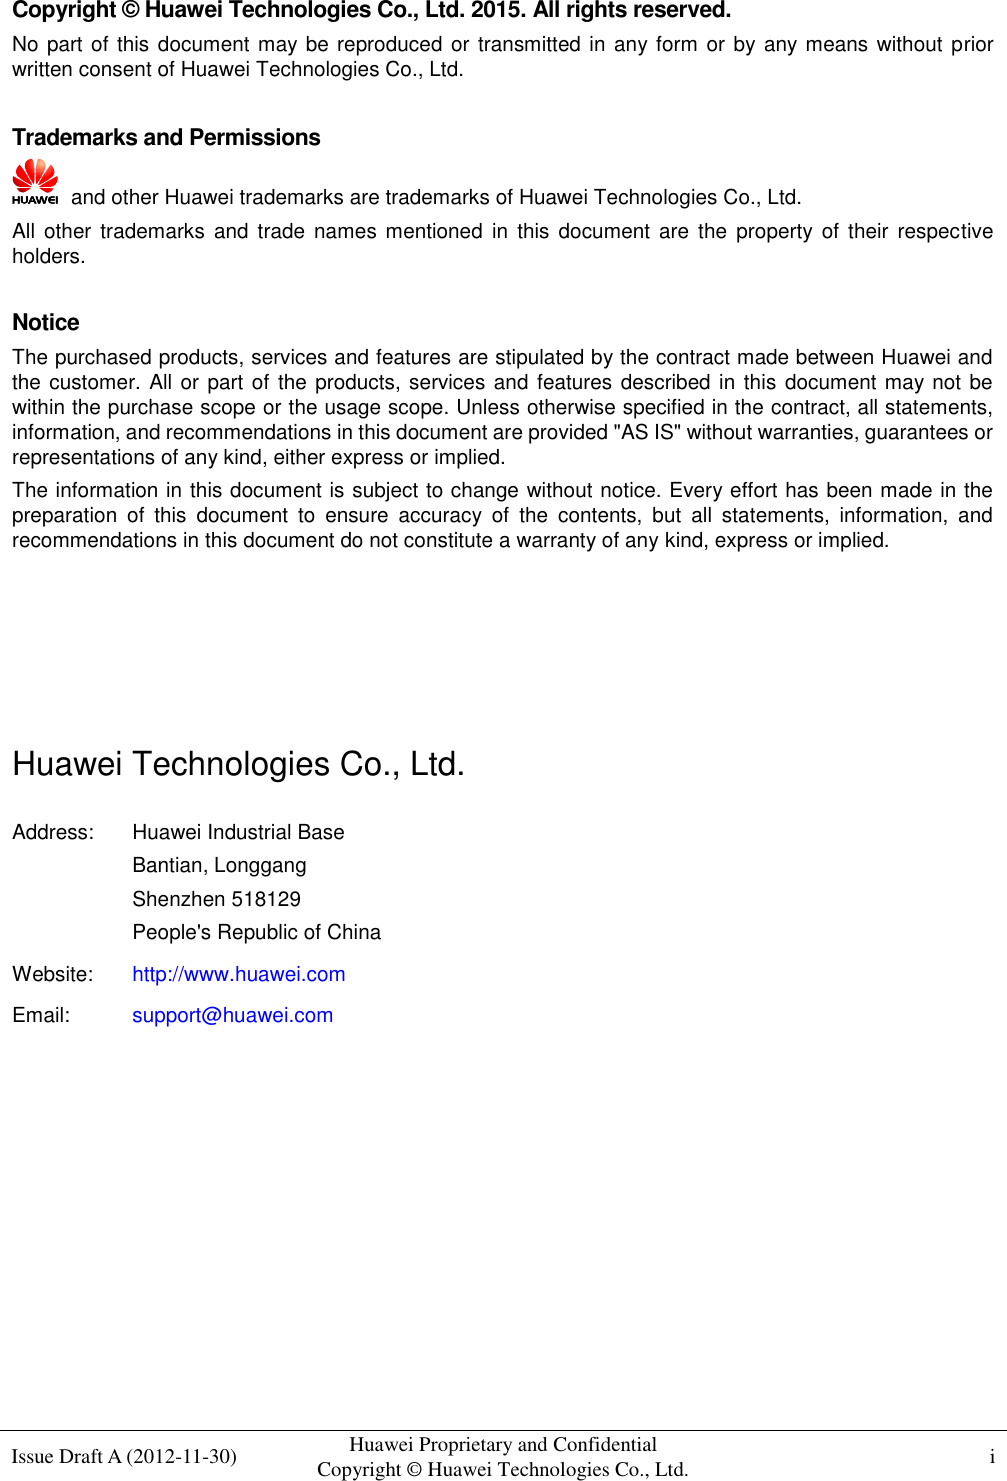  Issue Draft A (2012-11-30) Huawei Proprietary and Confidential                                     Copyright © Huawei Technologies Co., Ltd. i    Copyright © Huawei Technologies Co., Ltd. 2015. All rights reserved. No part of this document may be reproduced or transmitted in any form or  by any means without  prior written consent of Huawei Technologies Co., Ltd.  Trademarks and Permissions   and other Huawei trademarks are trademarks of Huawei Technologies Co., Ltd. All other  trademarks  and  trade  names  mentioned  in  this  document  are  the  property  of  their  respective holders.  Notice The purchased products, services and features are stipulated by the contract made between Huawei and the customer.  All or part of the products, services and features described in this document may not be within the purchase scope or the usage scope. Unless otherwise specified in the contract, all statements, information, and recommendations in this document are provided &quot;AS IS&quot; without warranties, guarantees or representations of any kind, either express or implied. The information in this document is subject to change without notice. Every effort has been made in the preparation  of  this  document  to  ensure  accuracy  of  the  contents,  but  all  statements,  information,  and recommendations in this document do not constitute a warranty of any kind, express or implied.     Huawei Technologies Co., Ltd. Address: Huawei Industrial Base Bantian, Longgang Shenzhen 518129 People&apos;s Republic of China Website: http://www.huawei.com Email: support@huawei.com          